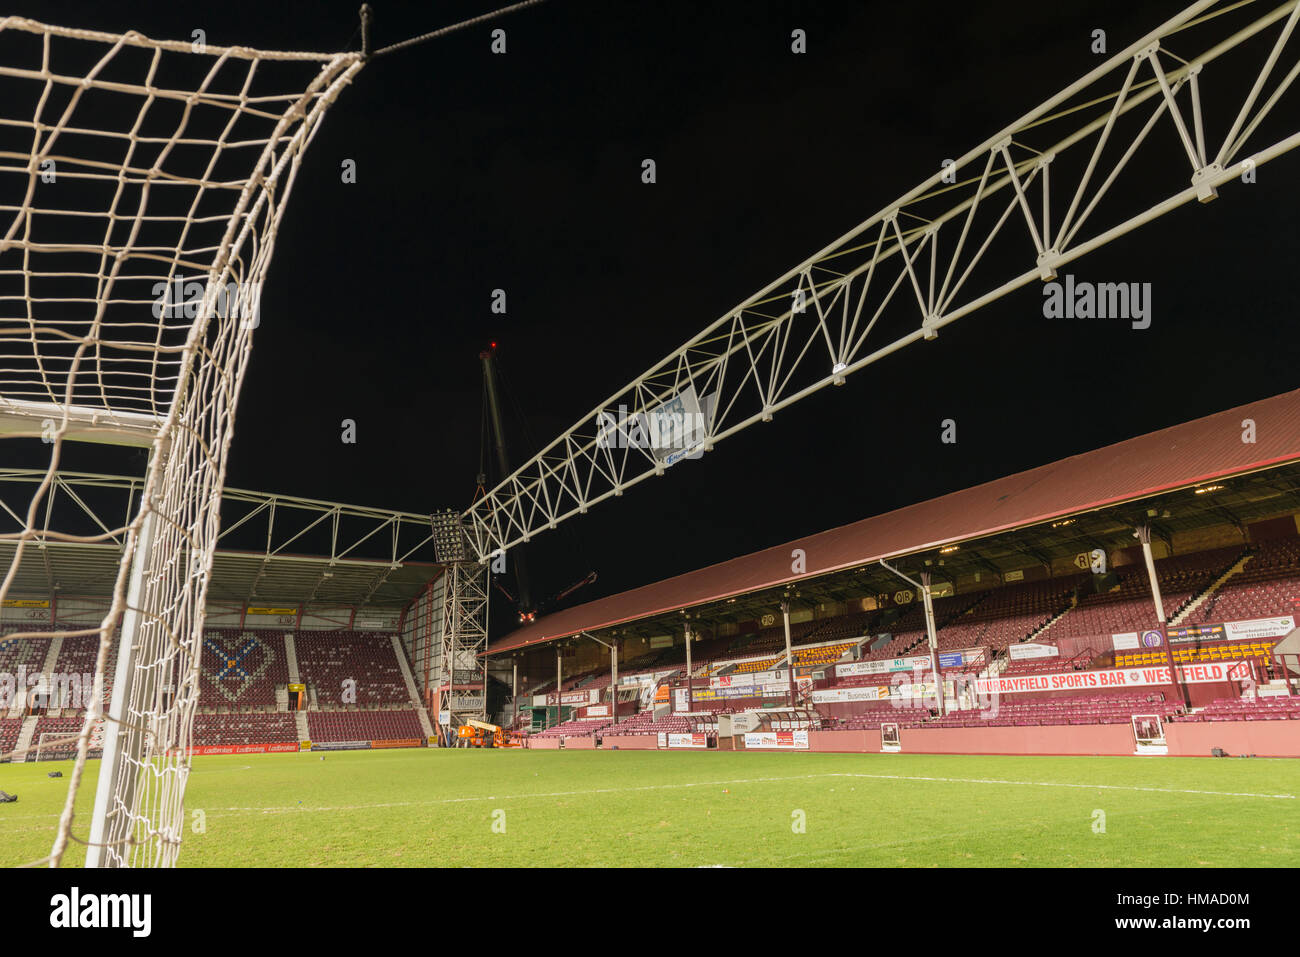 Edinburgh, UK. 2nd Feb 2017. Heart of Midlothian FC's redevelopment of Tynecastle Stadium completes the installation stage of a 104 ton steel structure over the existing main stand. This will allow the new stand to be built over the existing stand, which will remain in use until the end of season 2016/17. The new stand will be completed in September 2017 increasing ground capacity by over 3,500. Credit: Alan Paterson/Alamy Live News Stock Photo